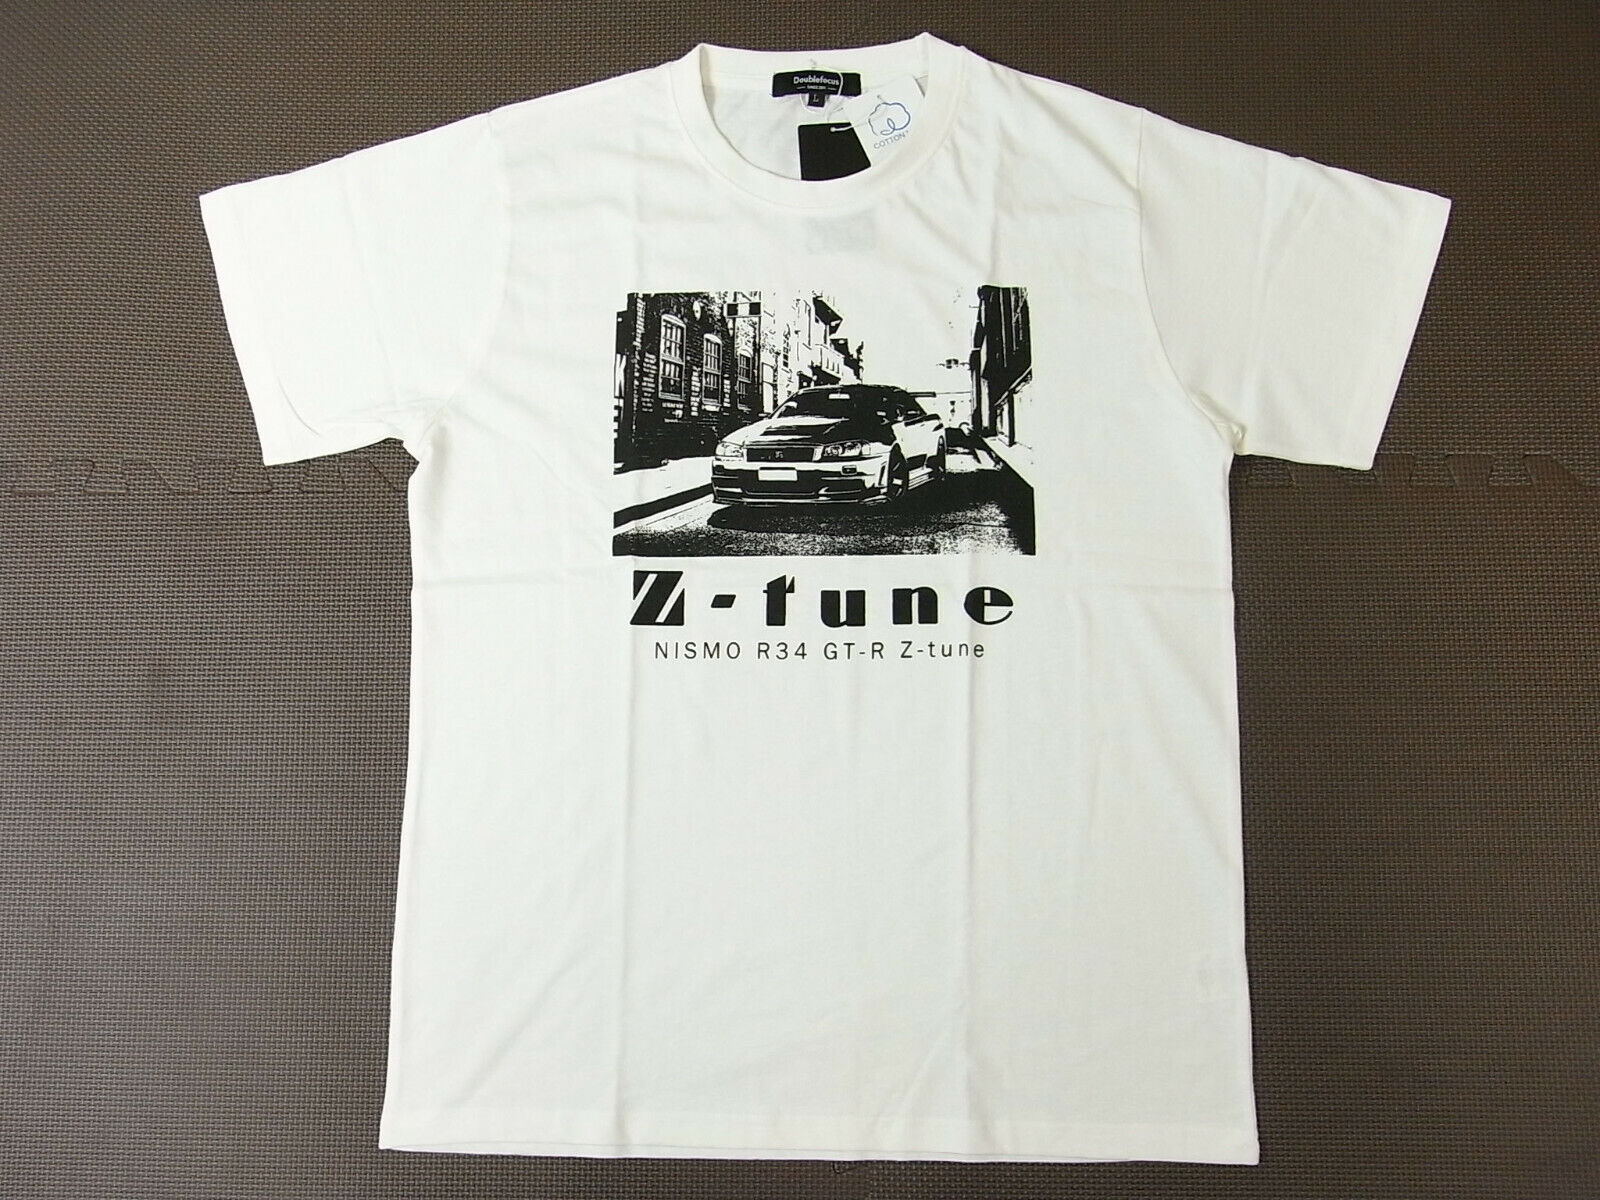 [GOODS] Nissan R34 Skyline GT-R Z-tune T-shirts Japanese L size nismo white RB26